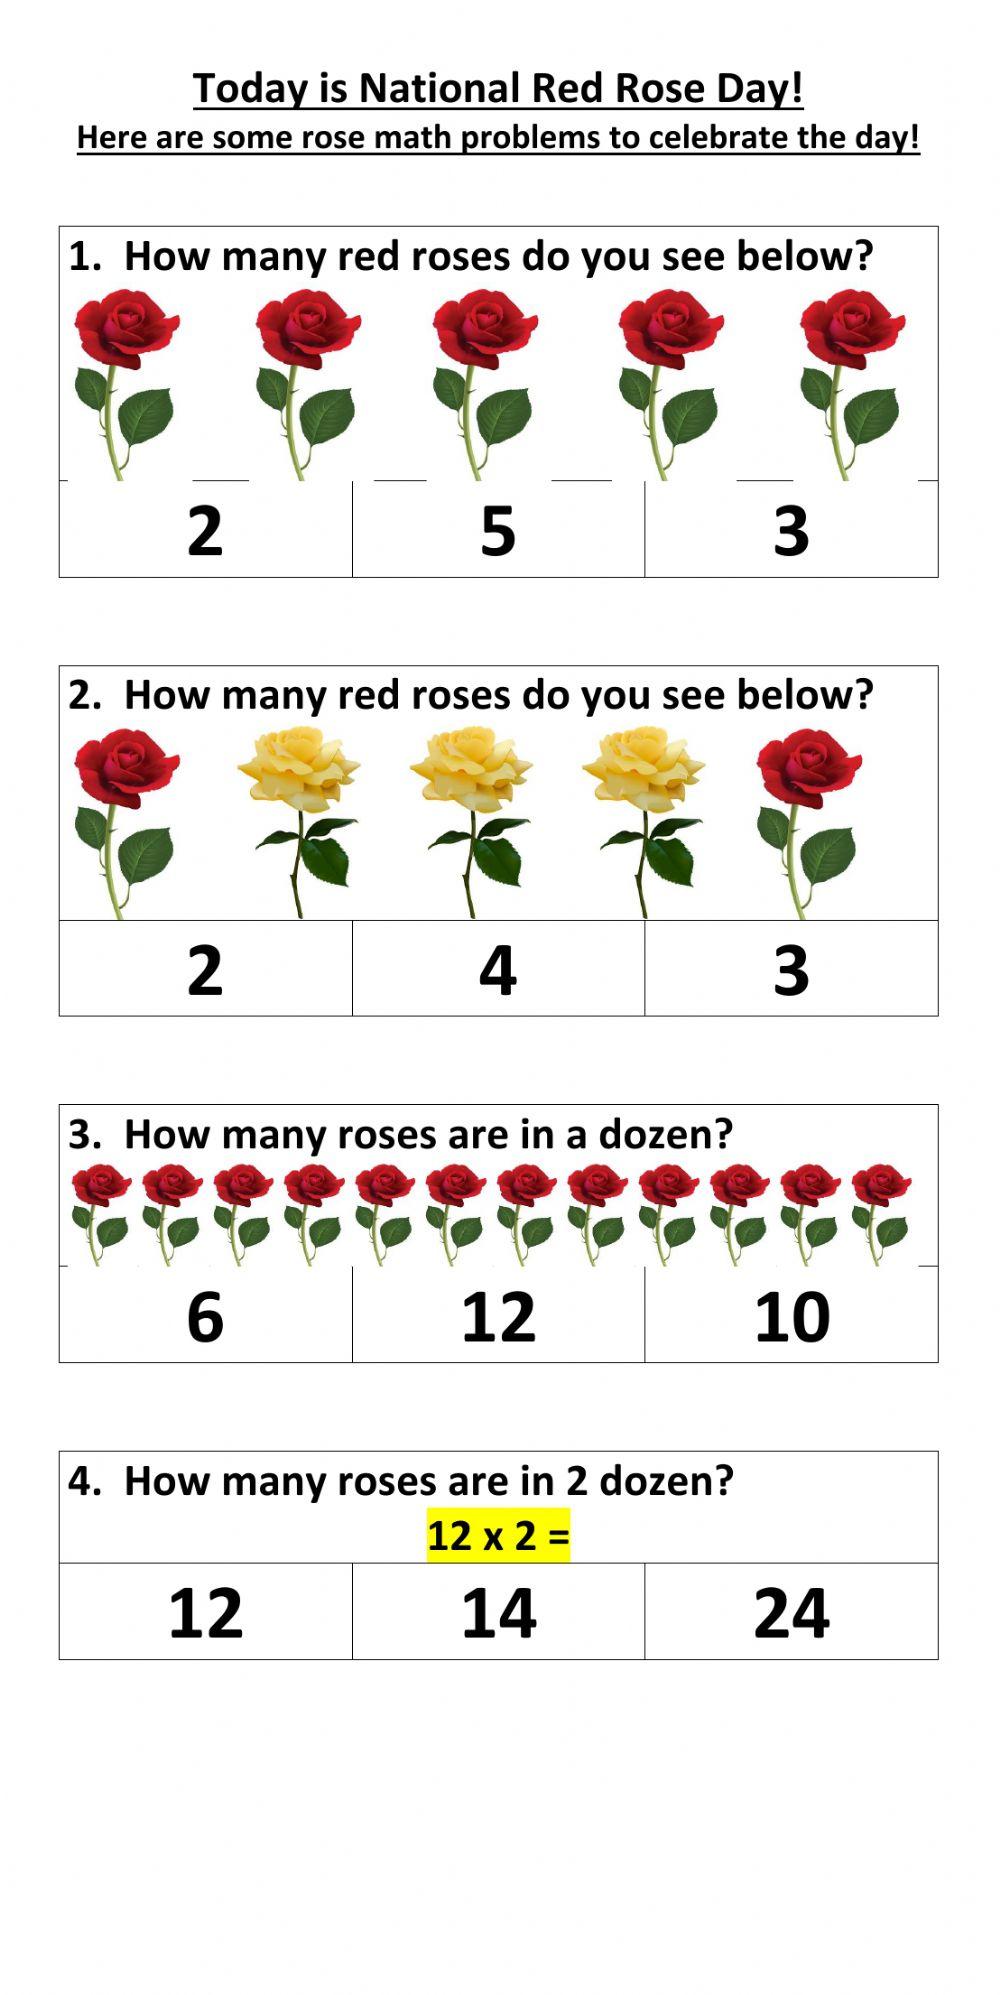 Red Rose day math